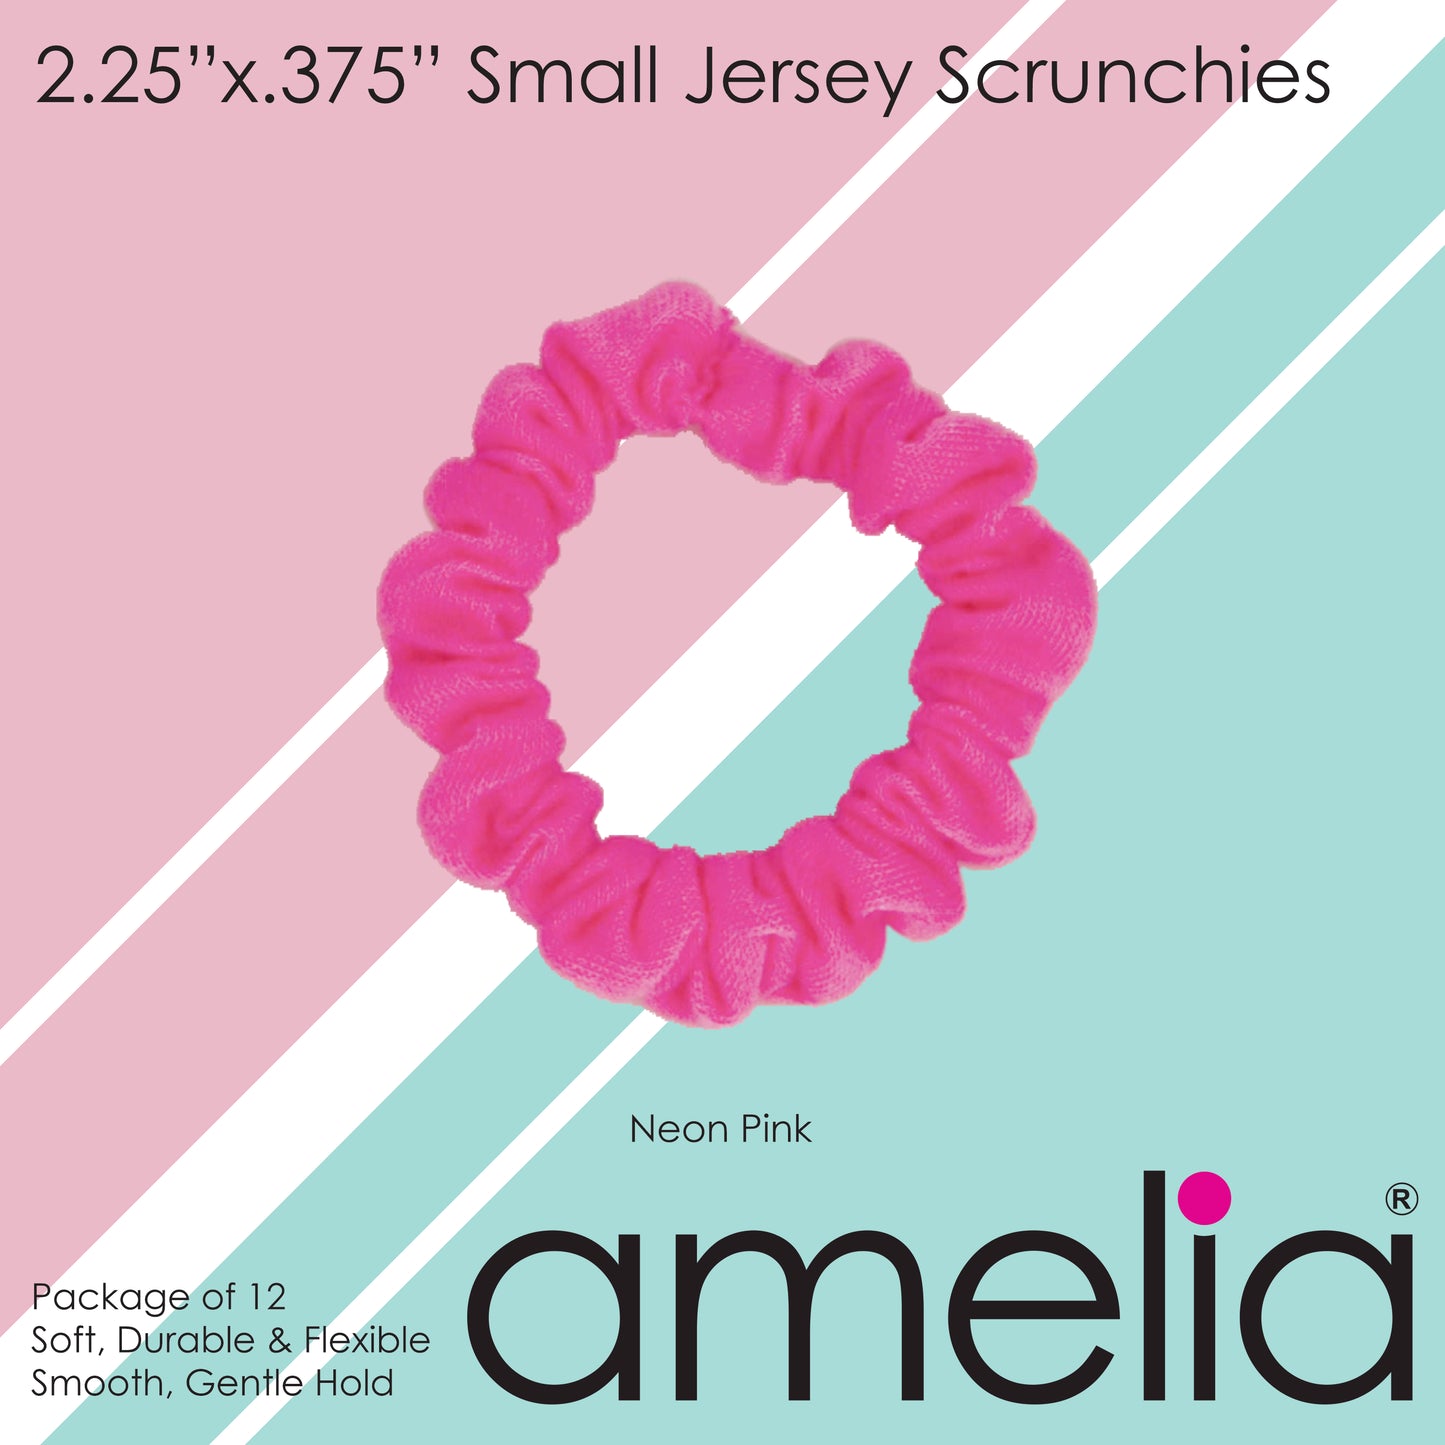 Amelia Beauty, Neon Pink Jersey Scrunchies, 2.25in Diameter, Gentle on Hair, Strong Hold, No Snag, No Dents or Creases. 12 Pack